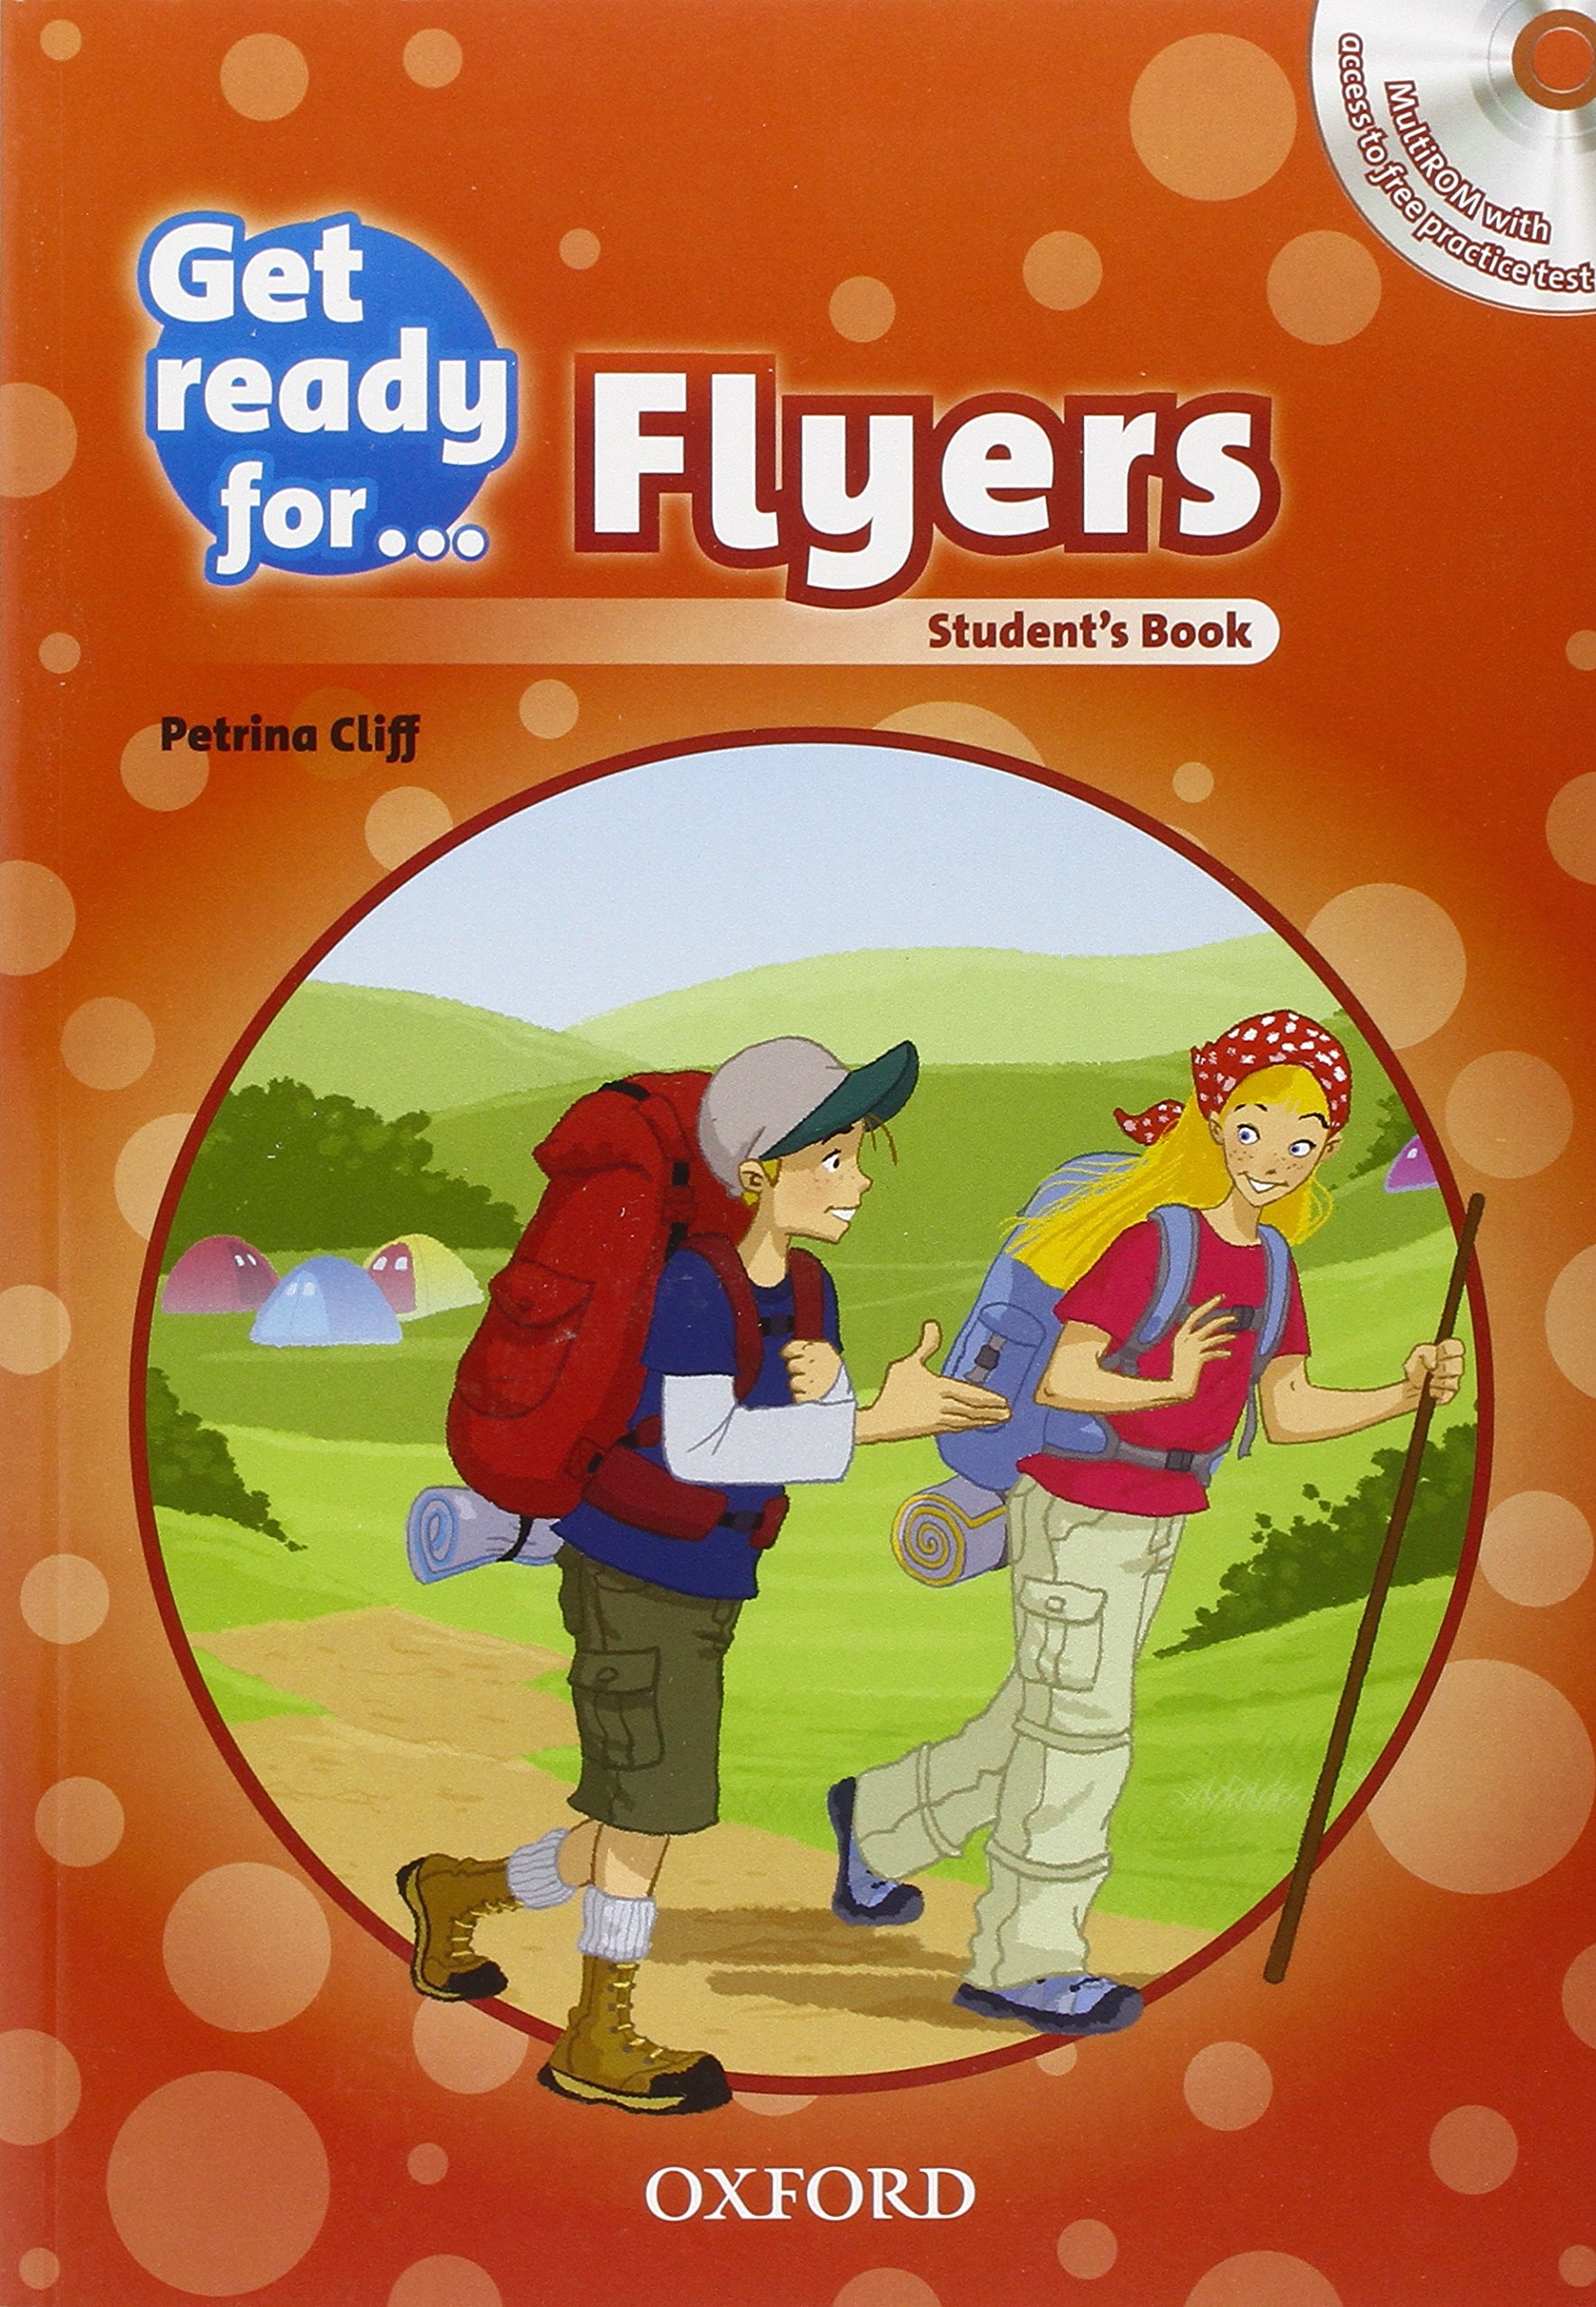 Get ready for Starters Oxford. Flyers книги. Get ready учебник. Get ready Flyers. Student s book